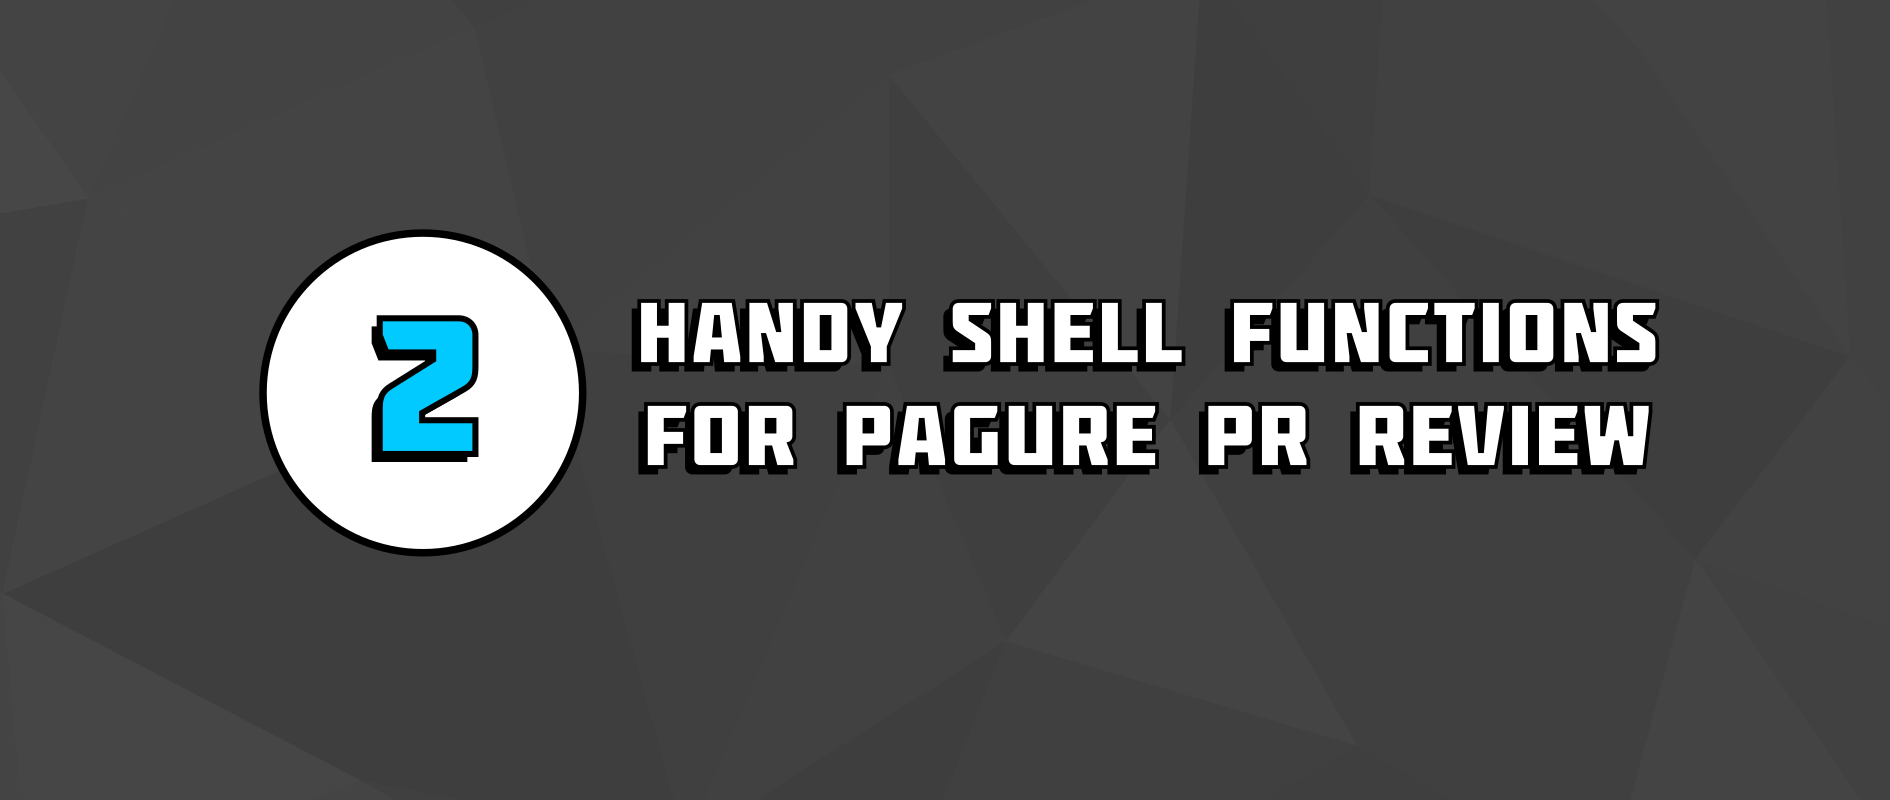 Two shell functions to simplify Pagure pull request reviews